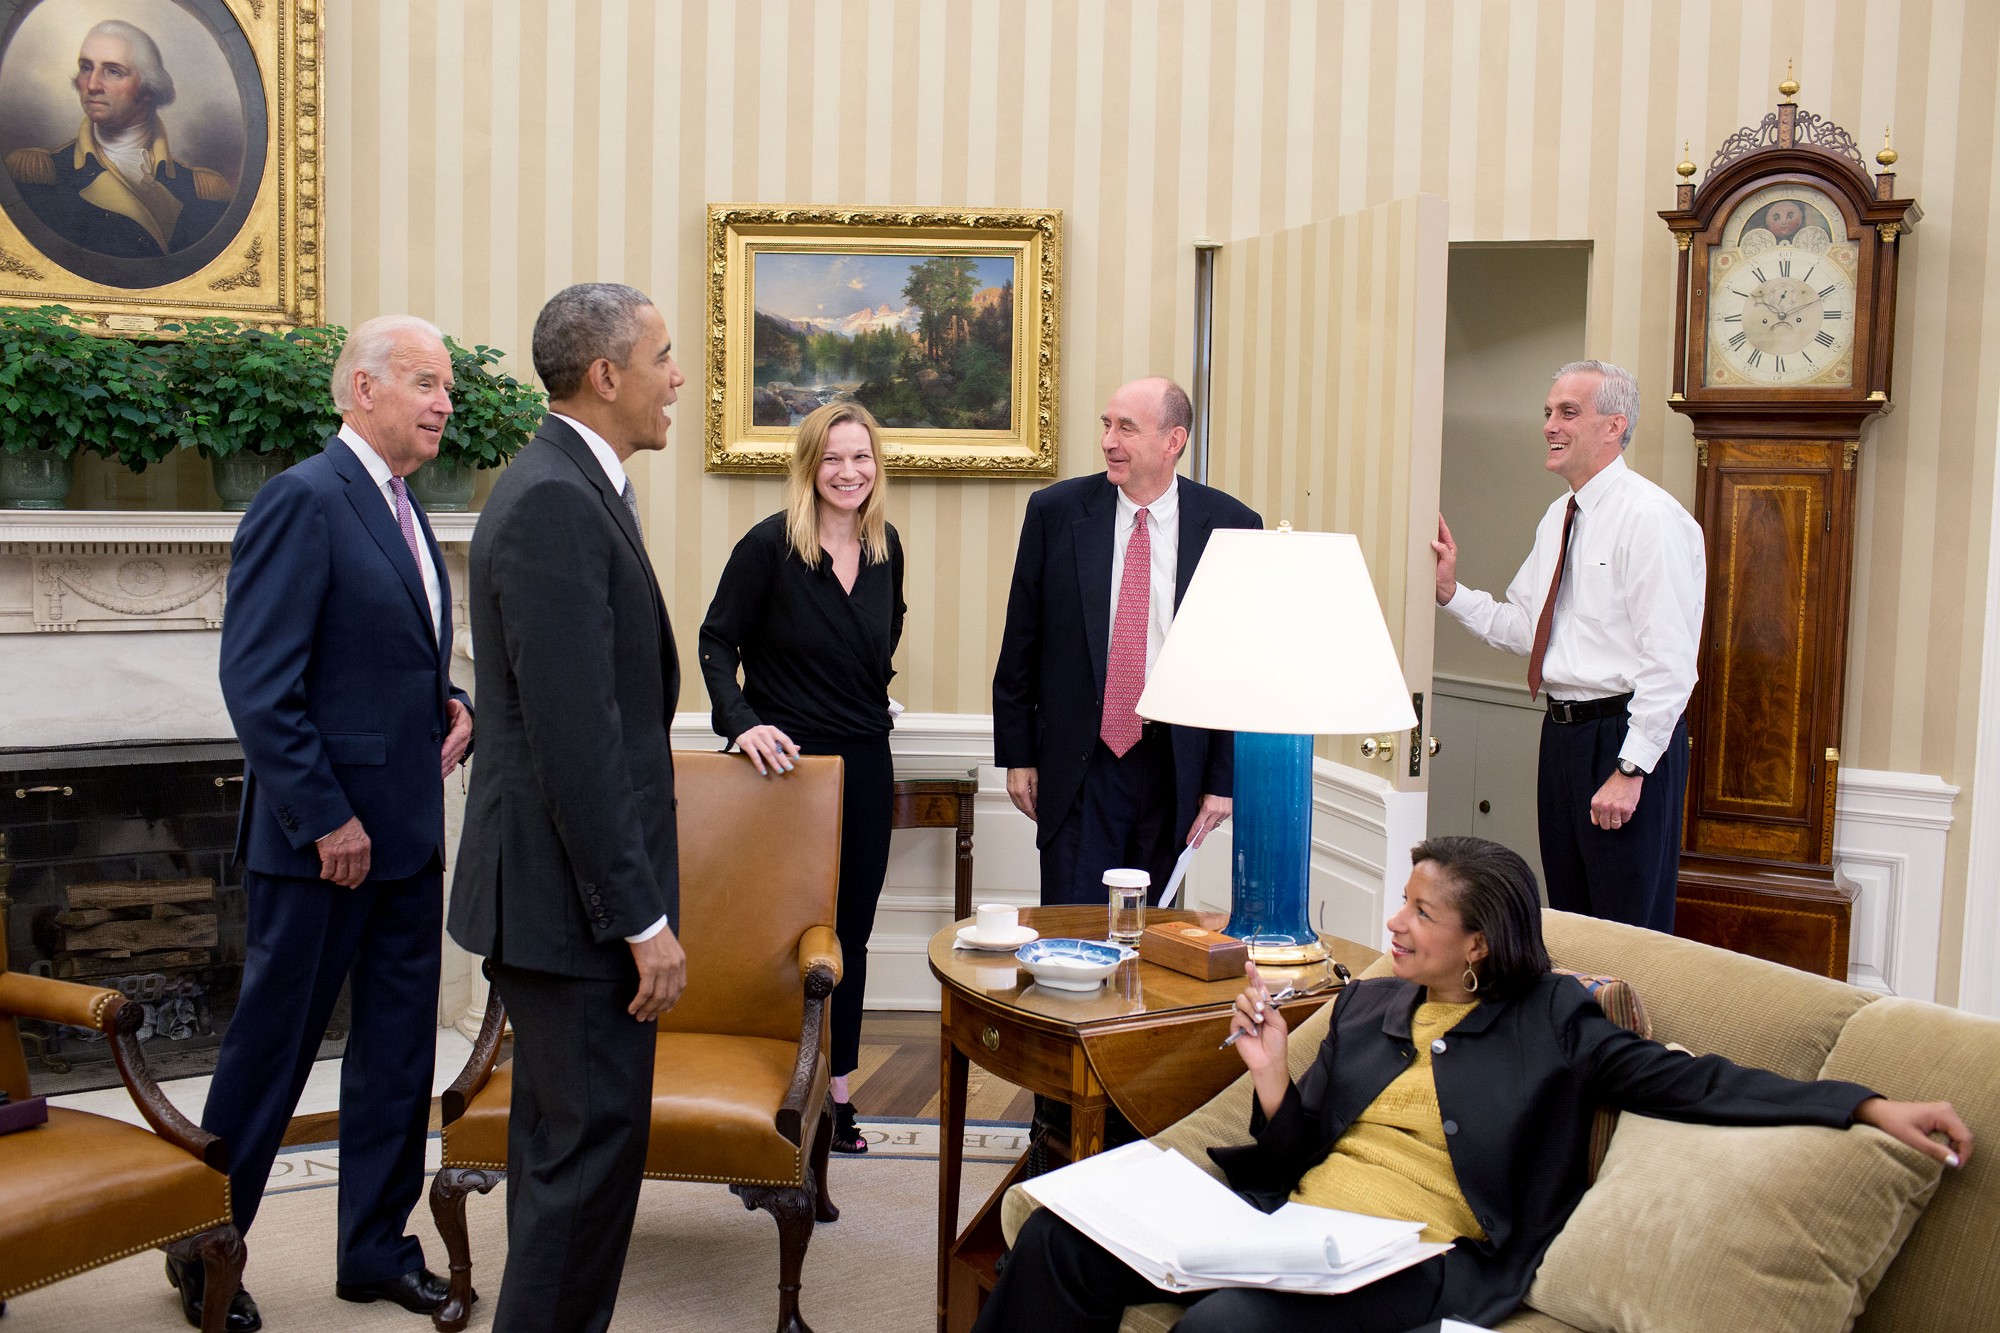 Neil Eggleston, Counsel to the President, joins the group in the Oval. (Official White House Photo by Pete Souza)